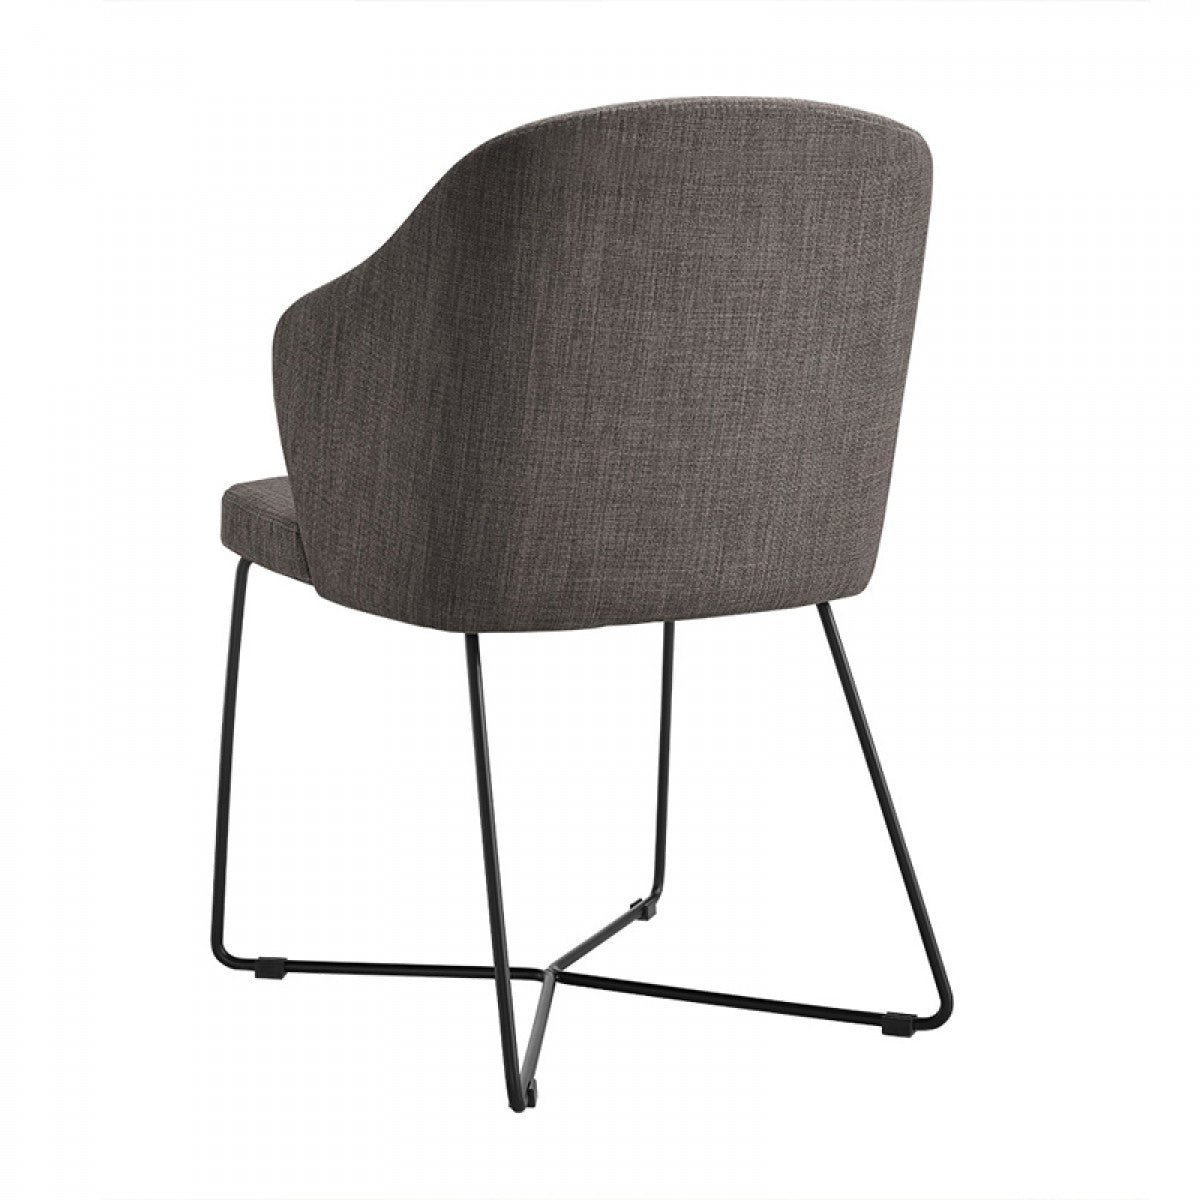 Set of Two Gray And Black Upholstered Fabric Dining Side Chairs